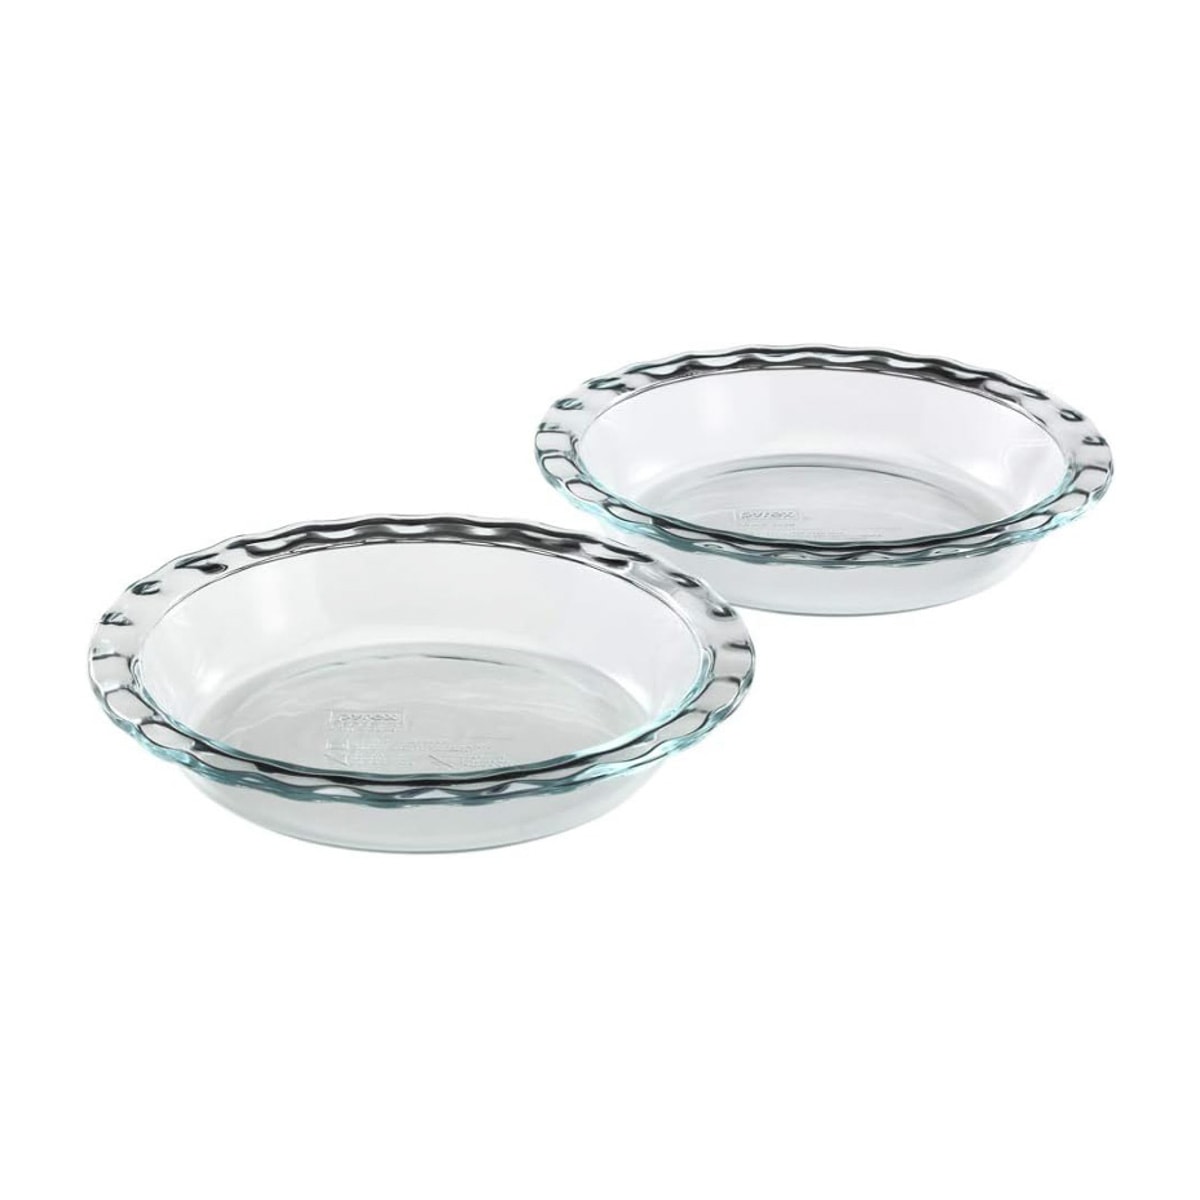 A set of two glass pie baking dishes.